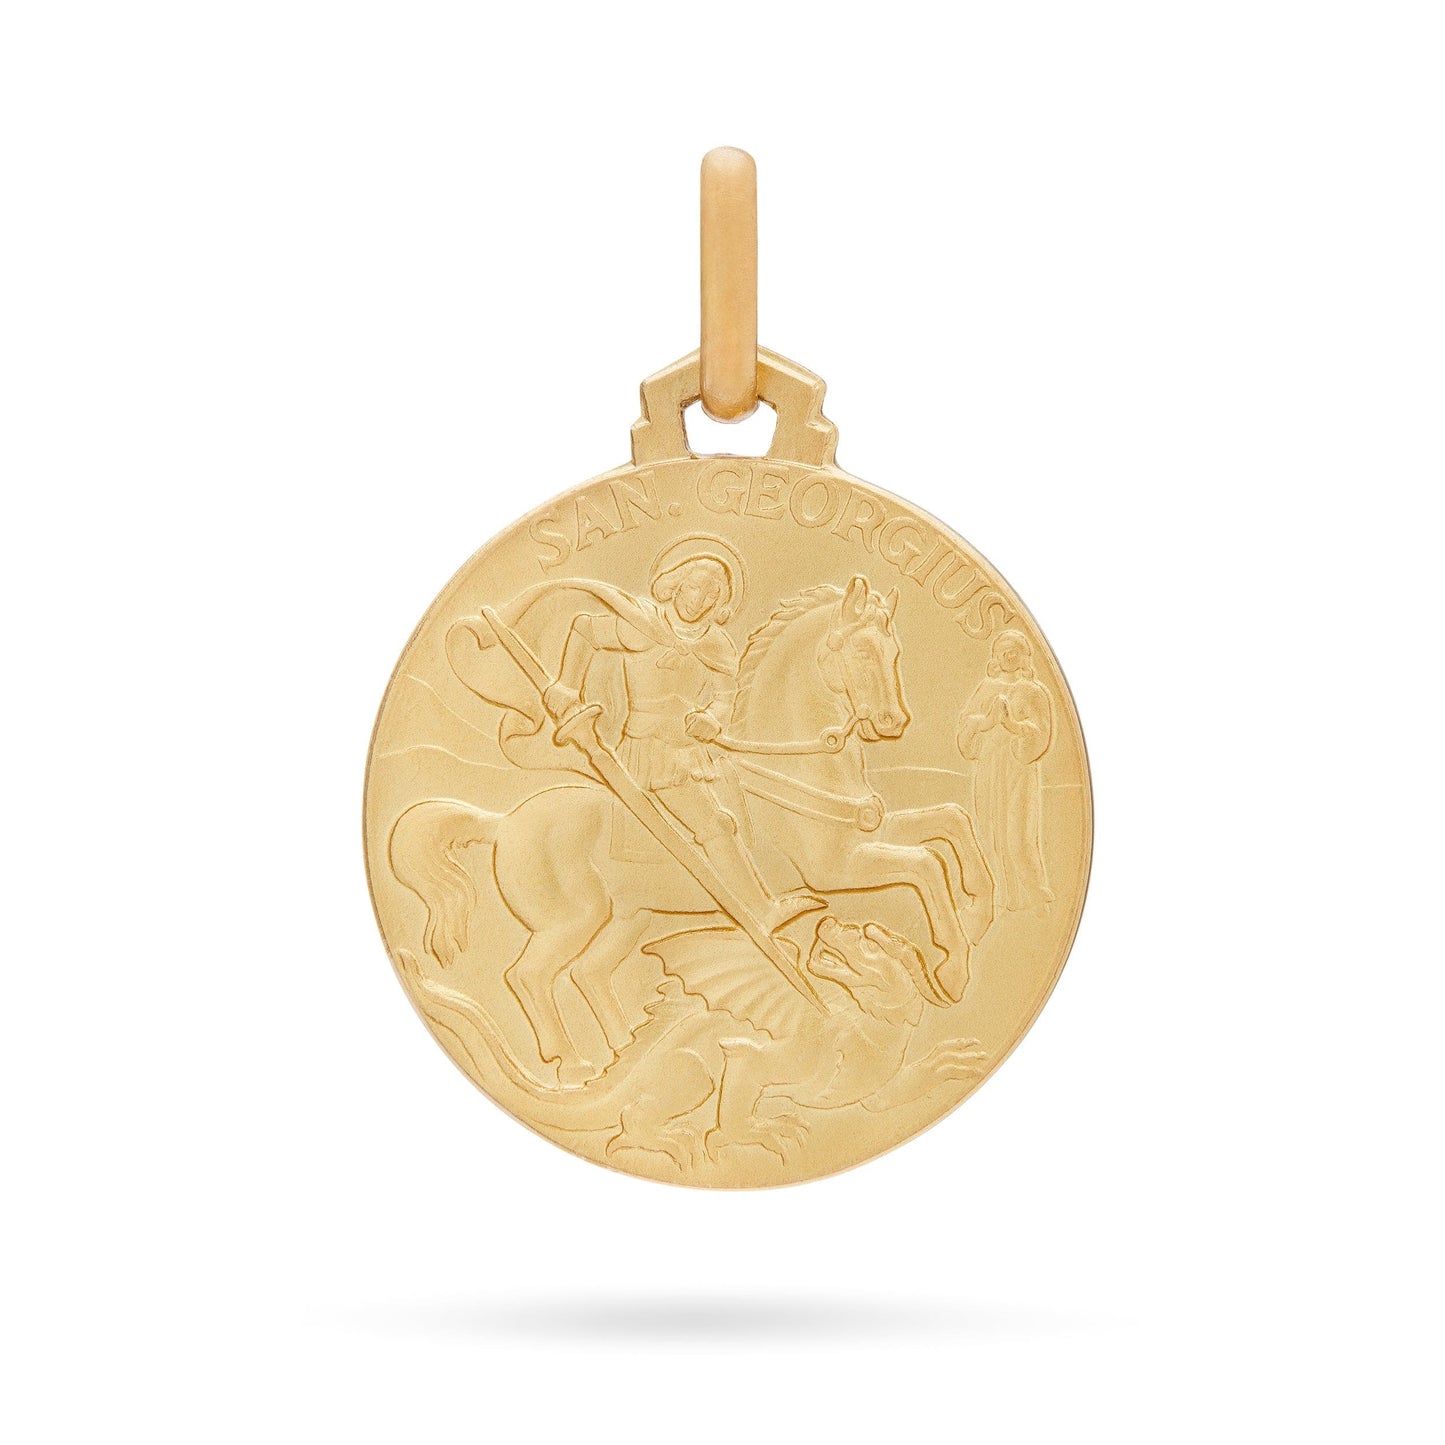 MONDO CATTOLICO 18 mm (0.70 in) Gold medal of Saint George